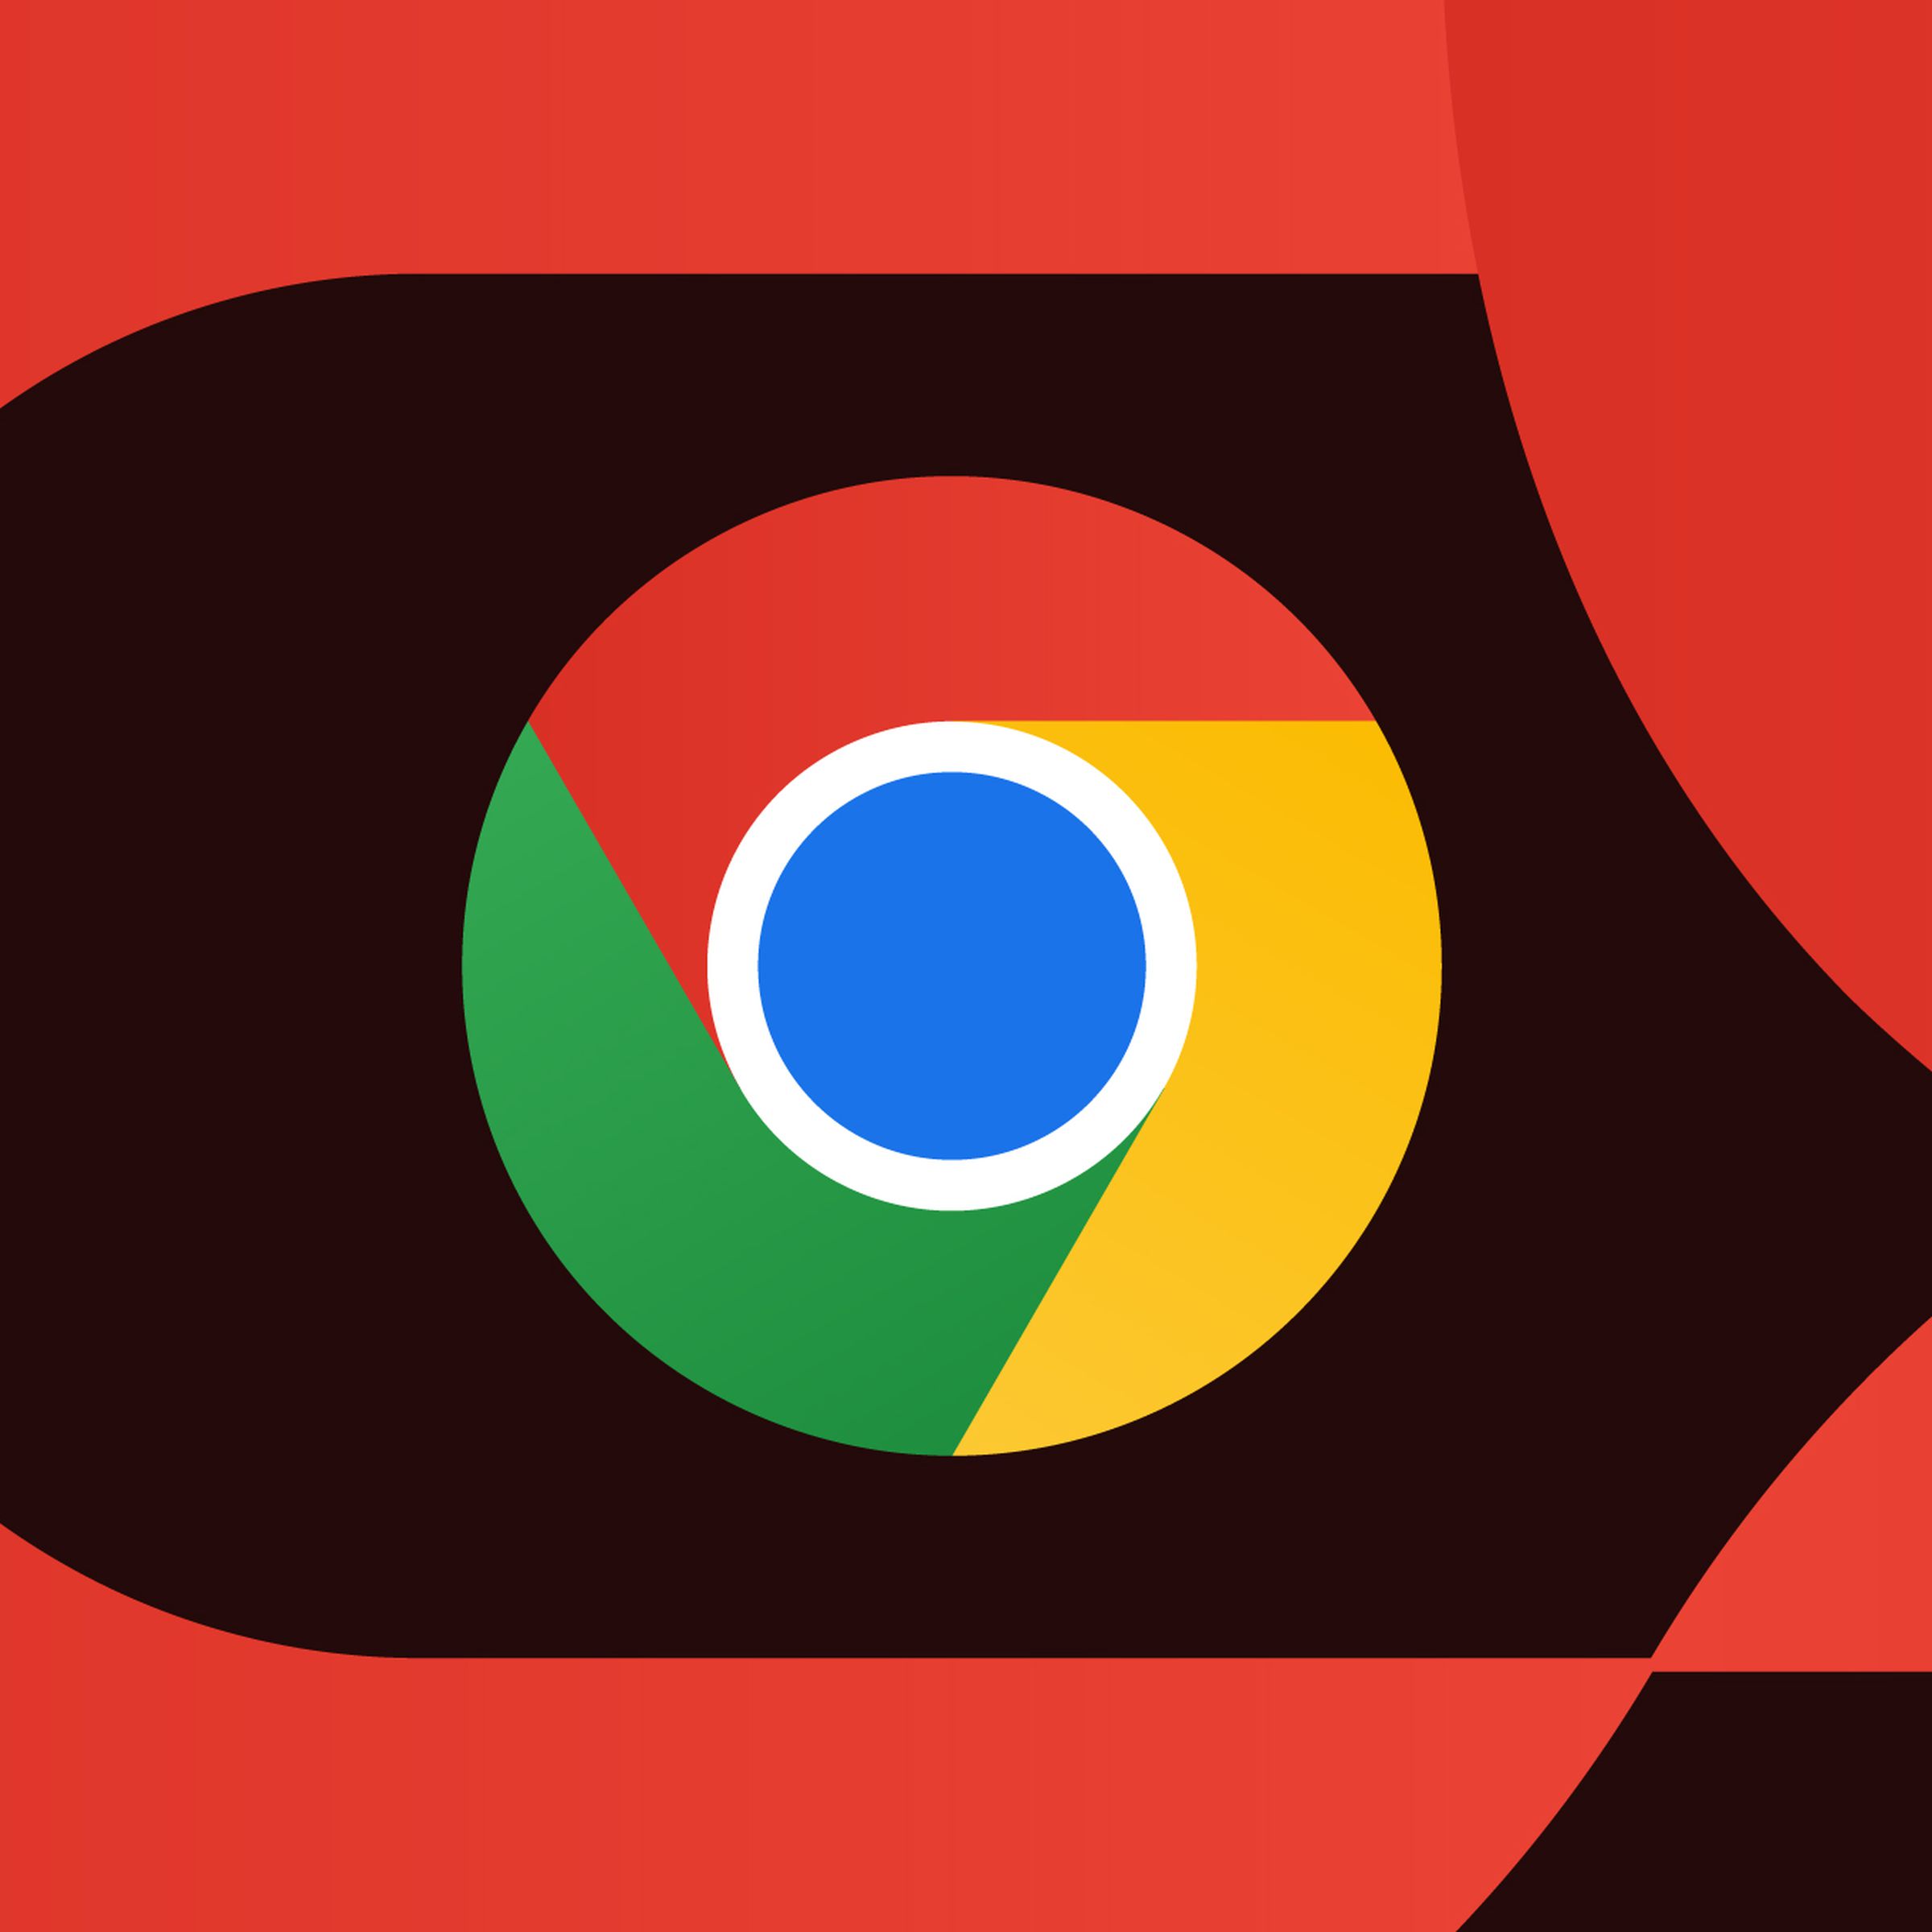 Illustration of the Chrome logo on a bright and dark red background.